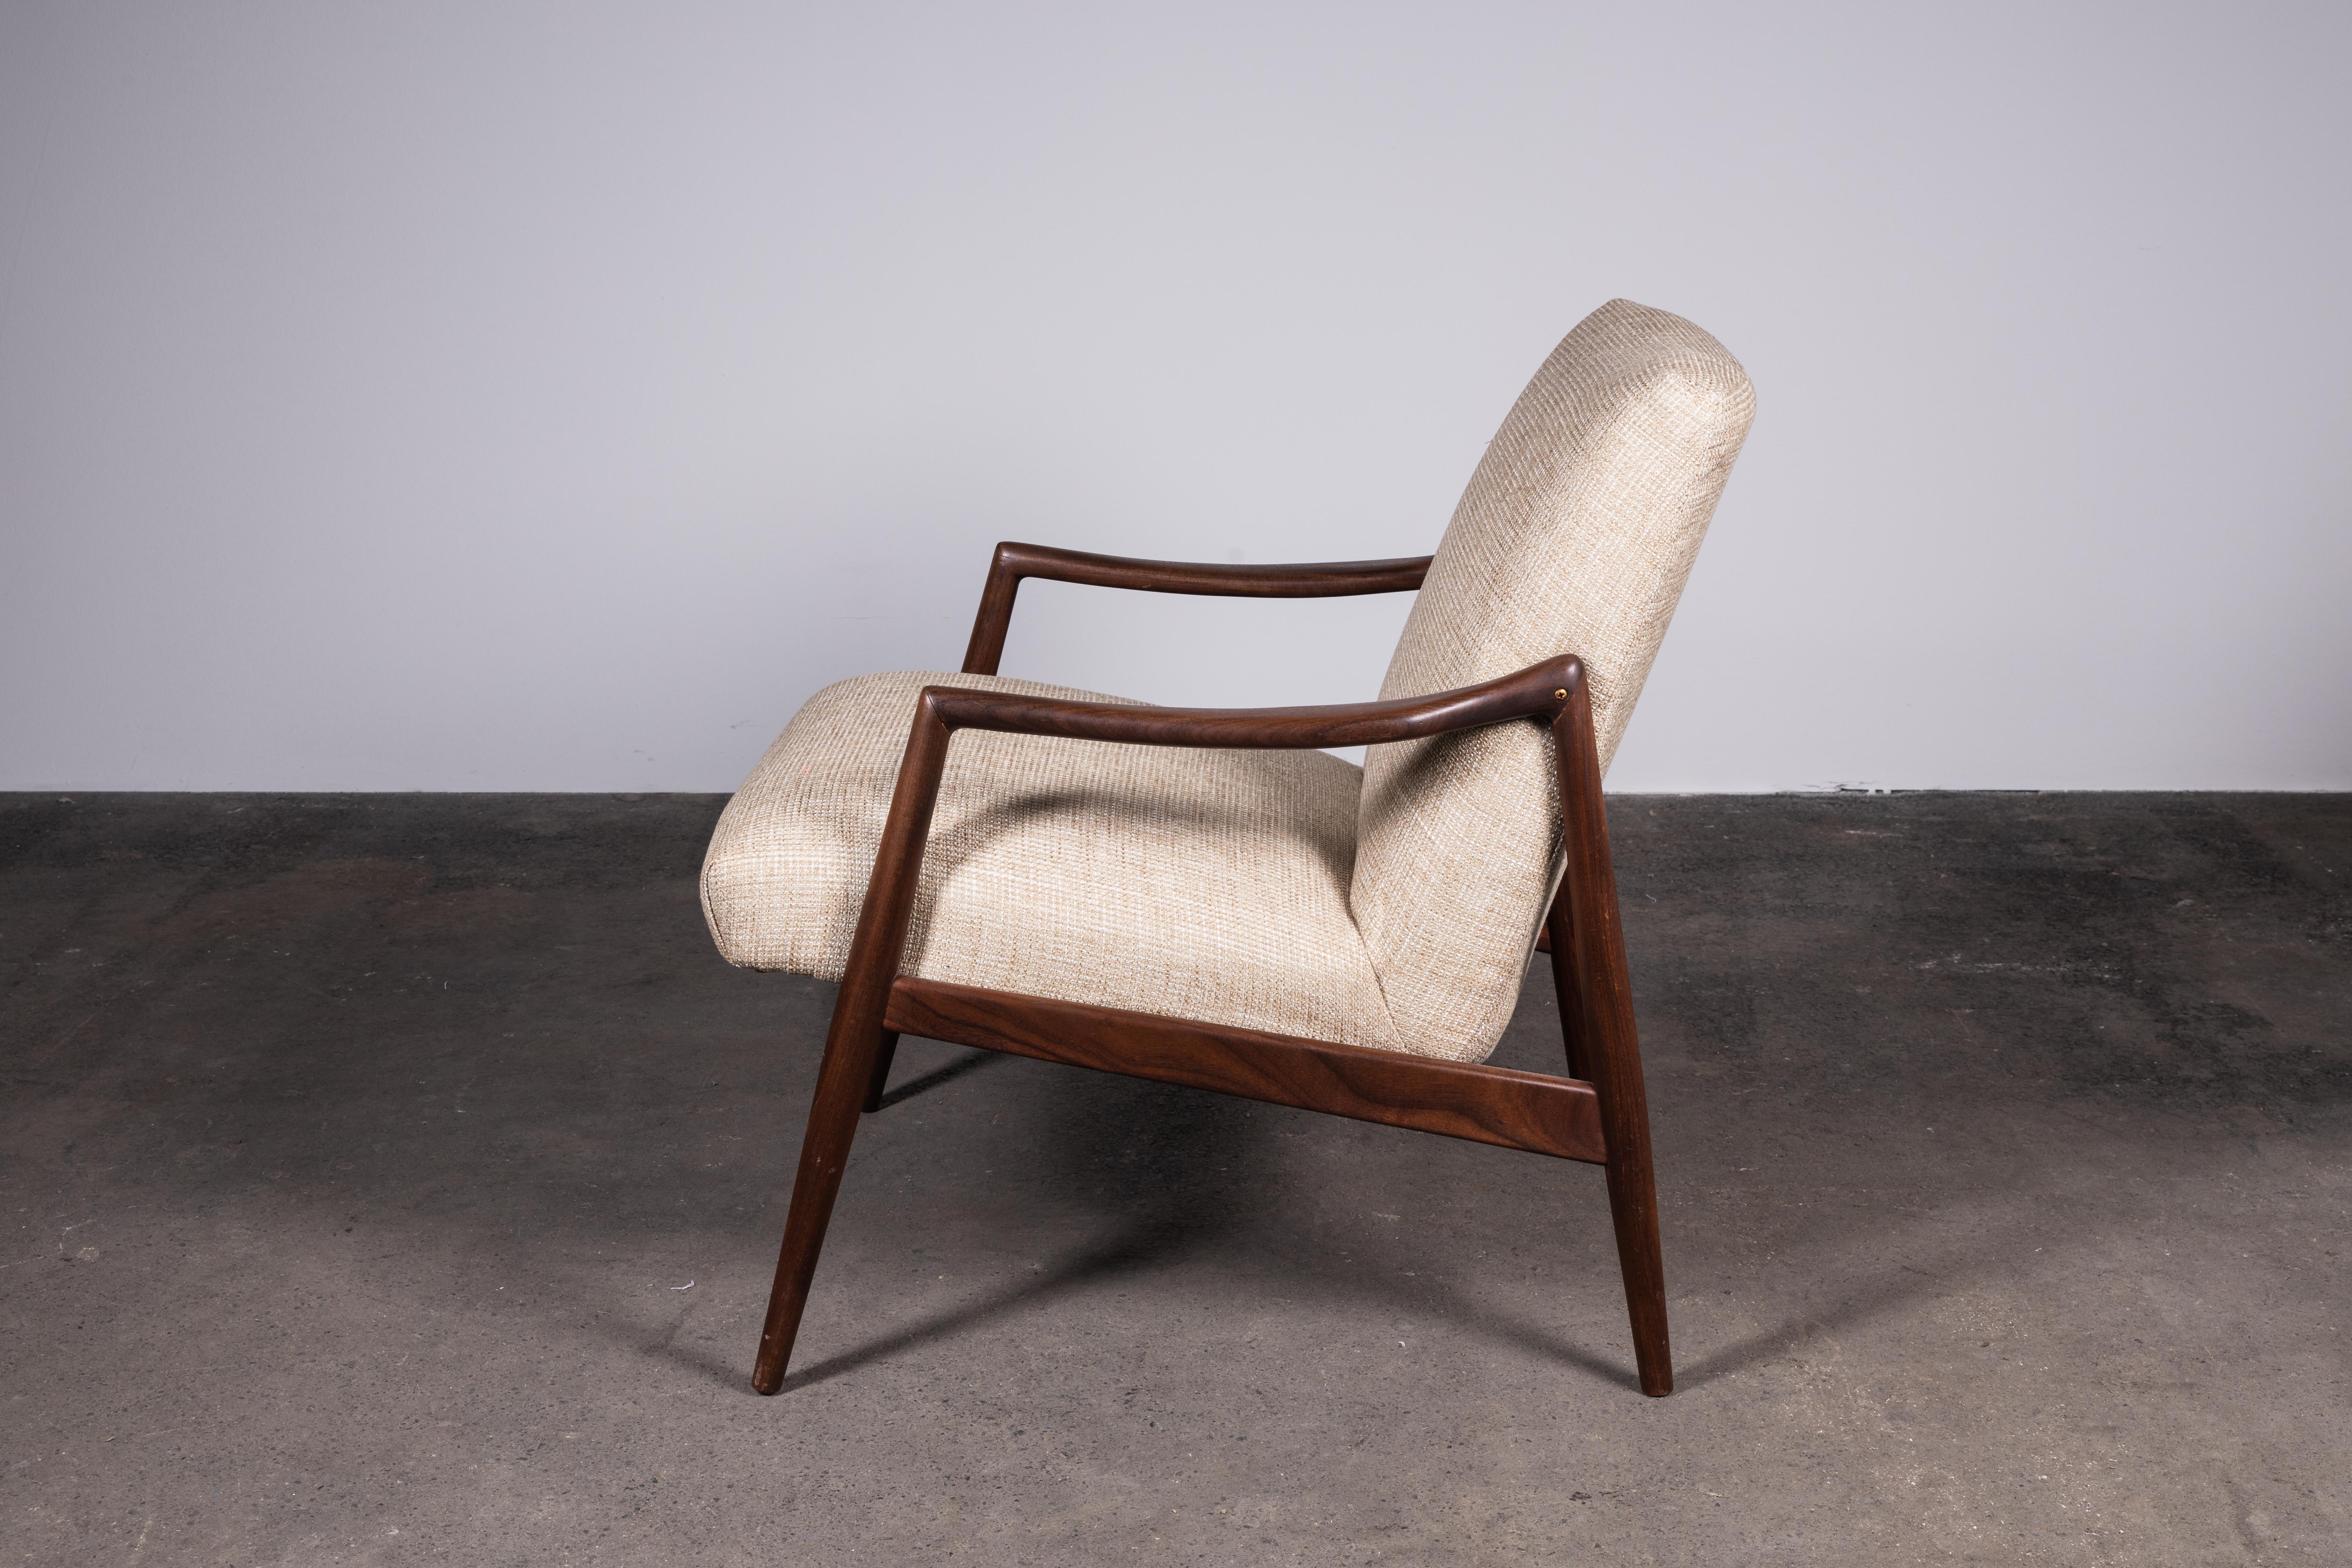 German Pair of 1950s Teak Armchairs by Hartmut Lohmeyer Upholstered à la Coco Chanel